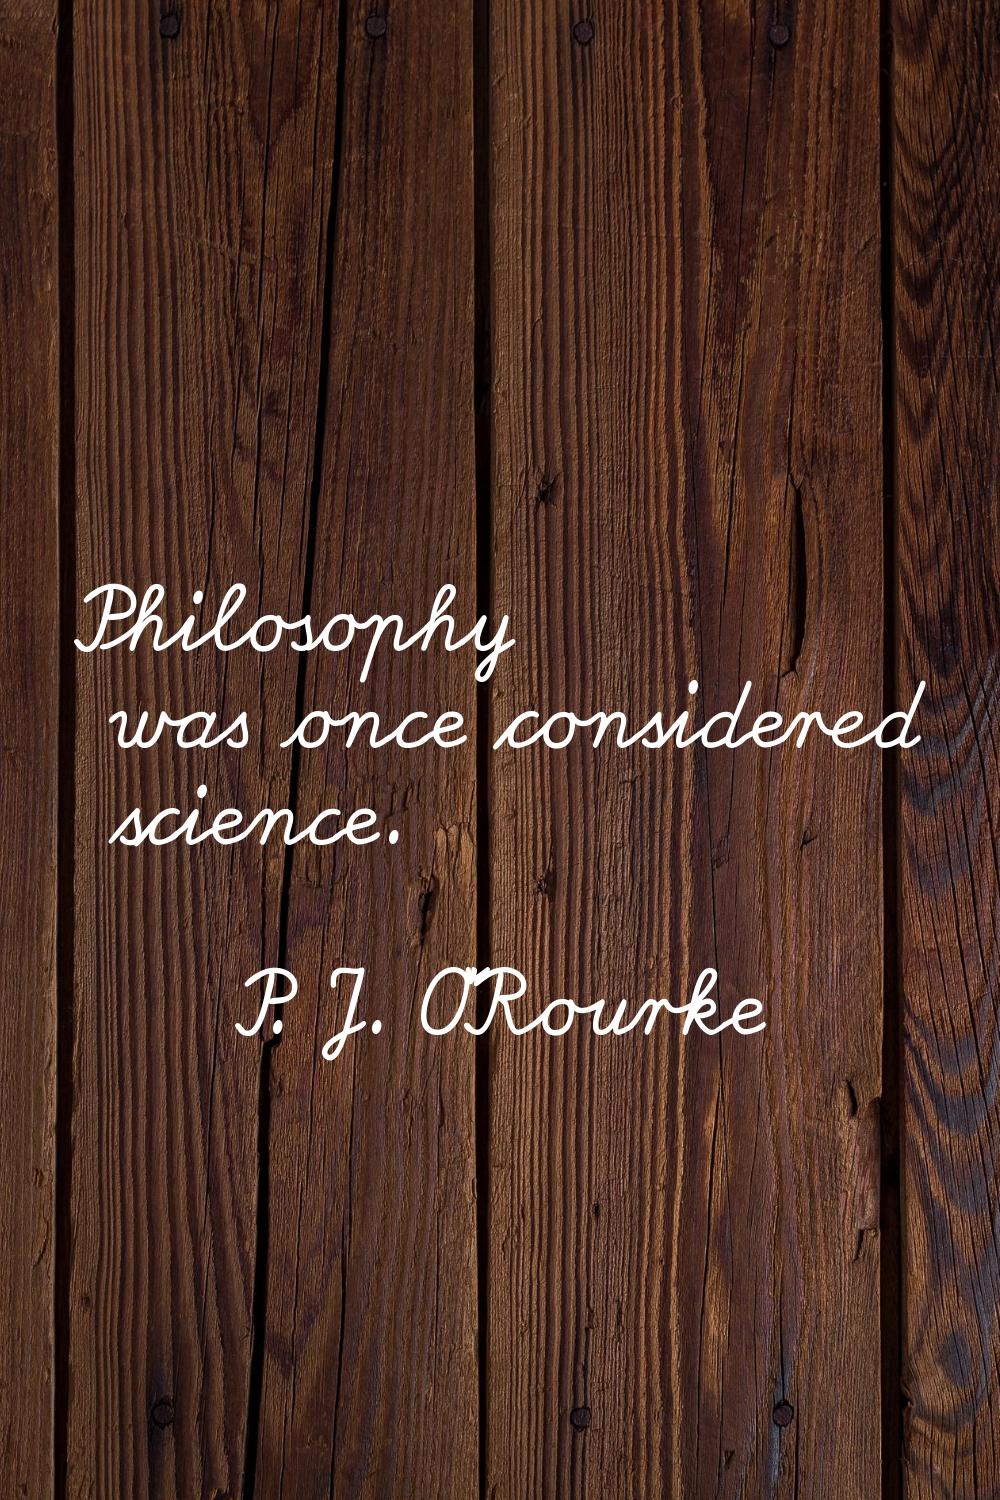 Philosophy was once considered science.